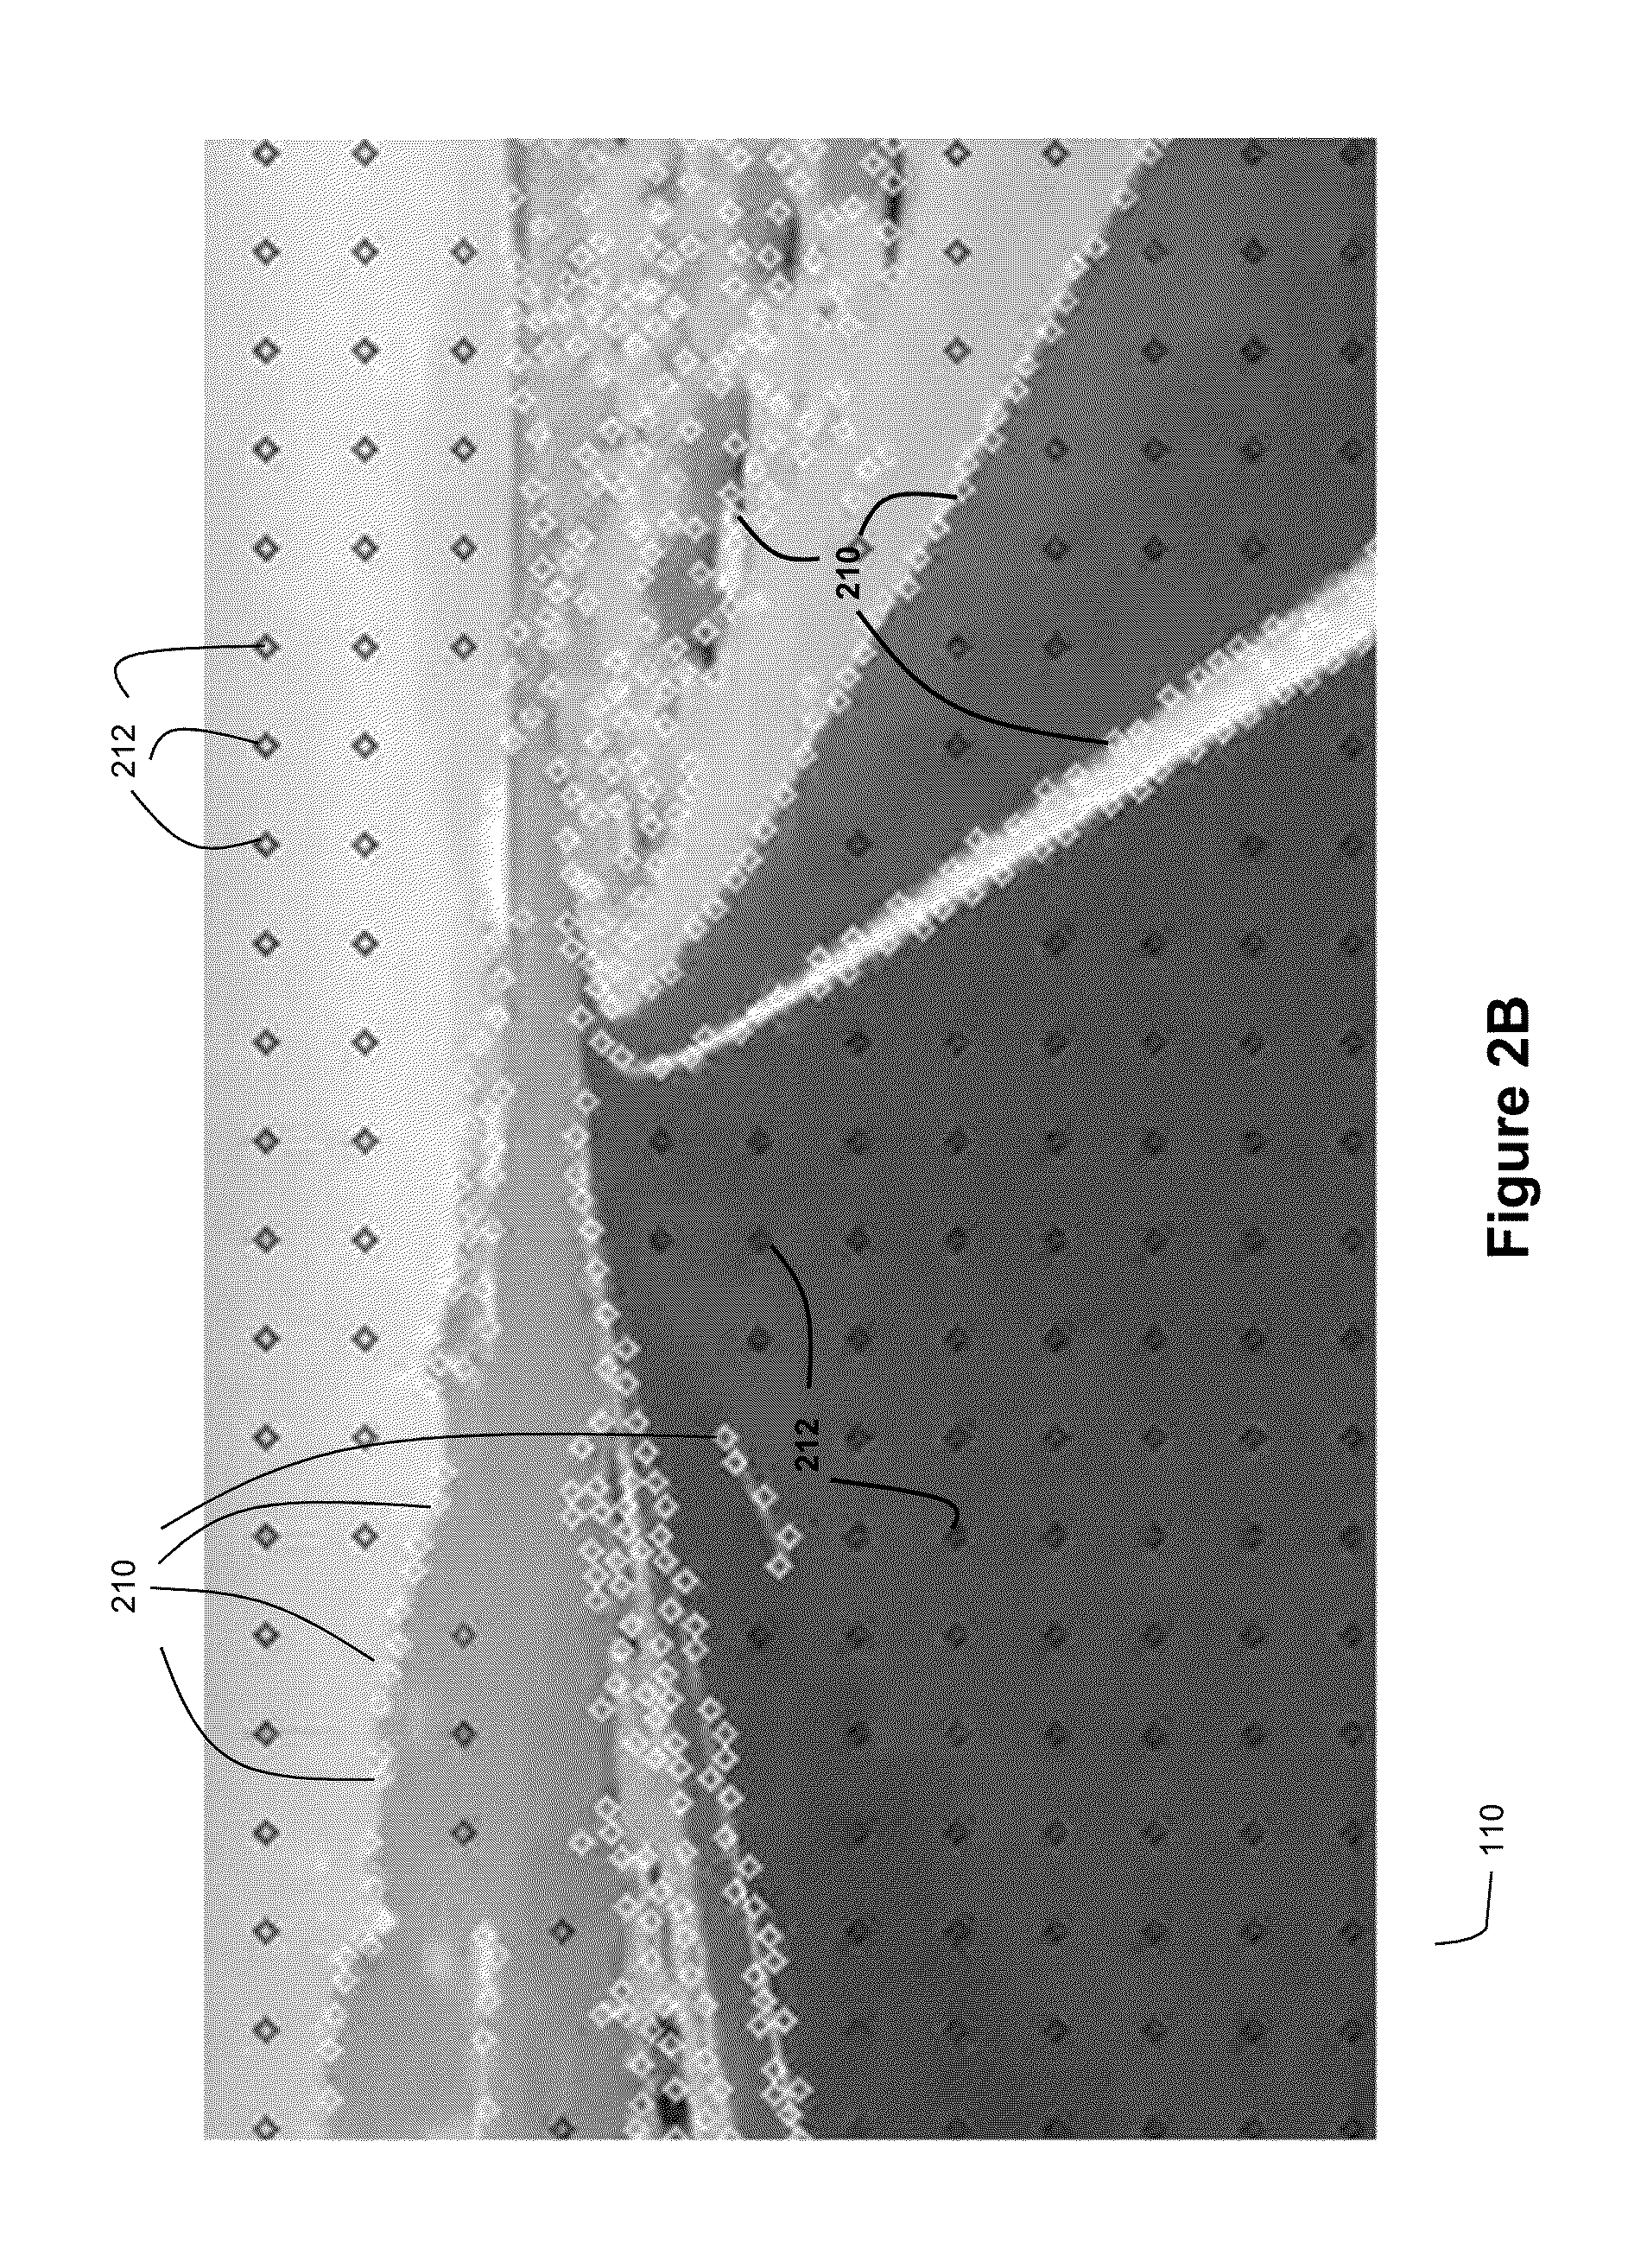 Method and System for Ladar Transmission with Spinning Polygon Mirror for Dynamic Scan Patterns